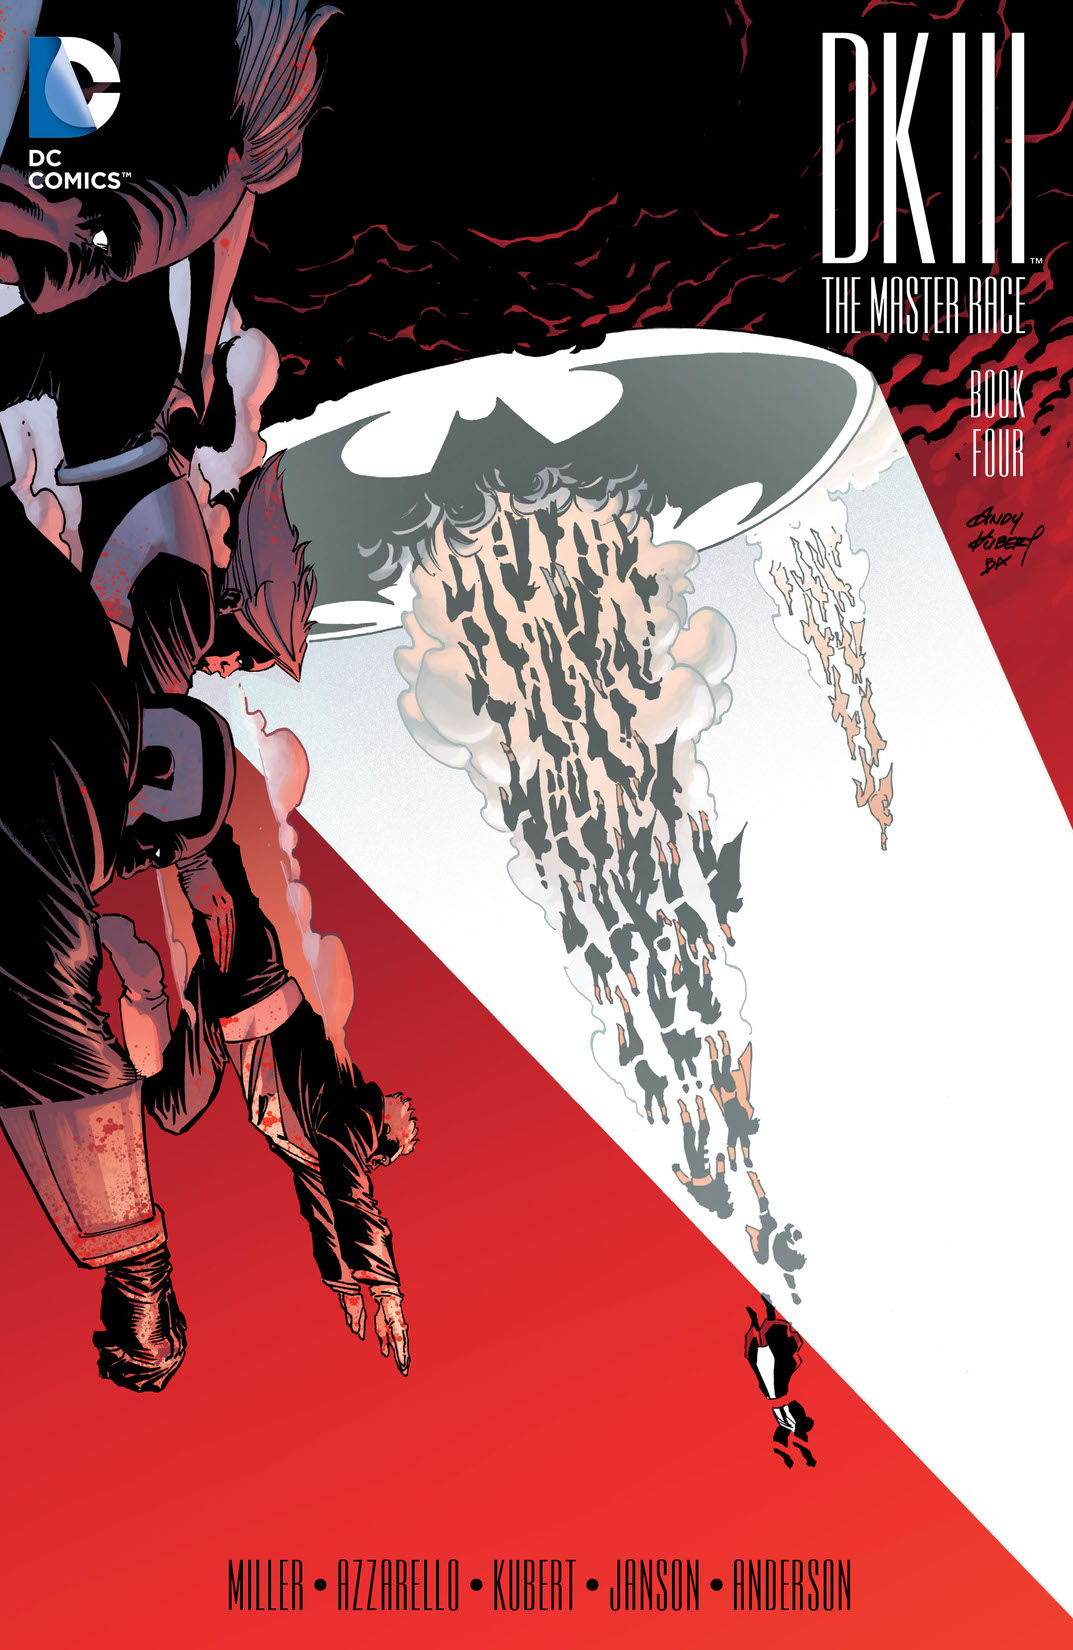 Dark Knight III: The Master Race #4 preview images